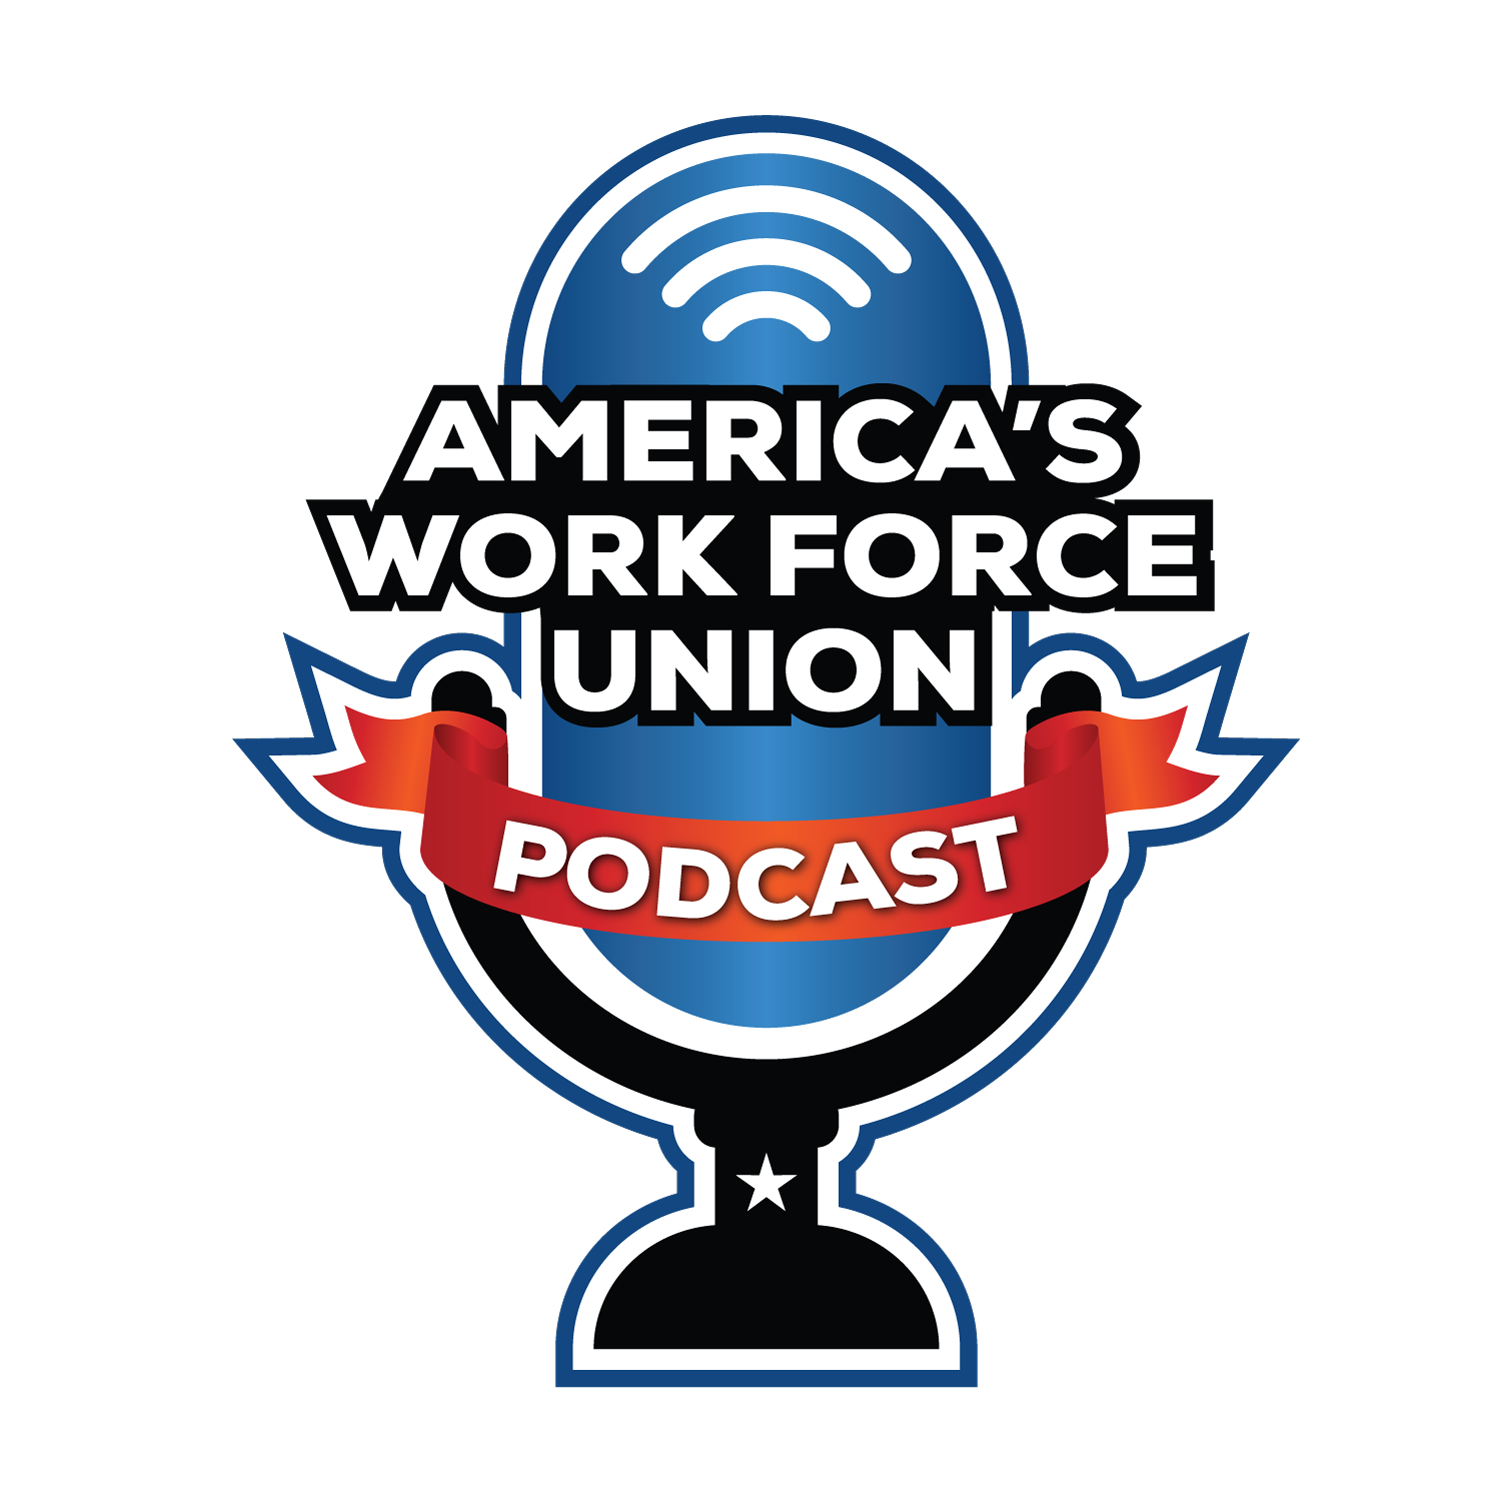 America’s Work Force Union Podcast